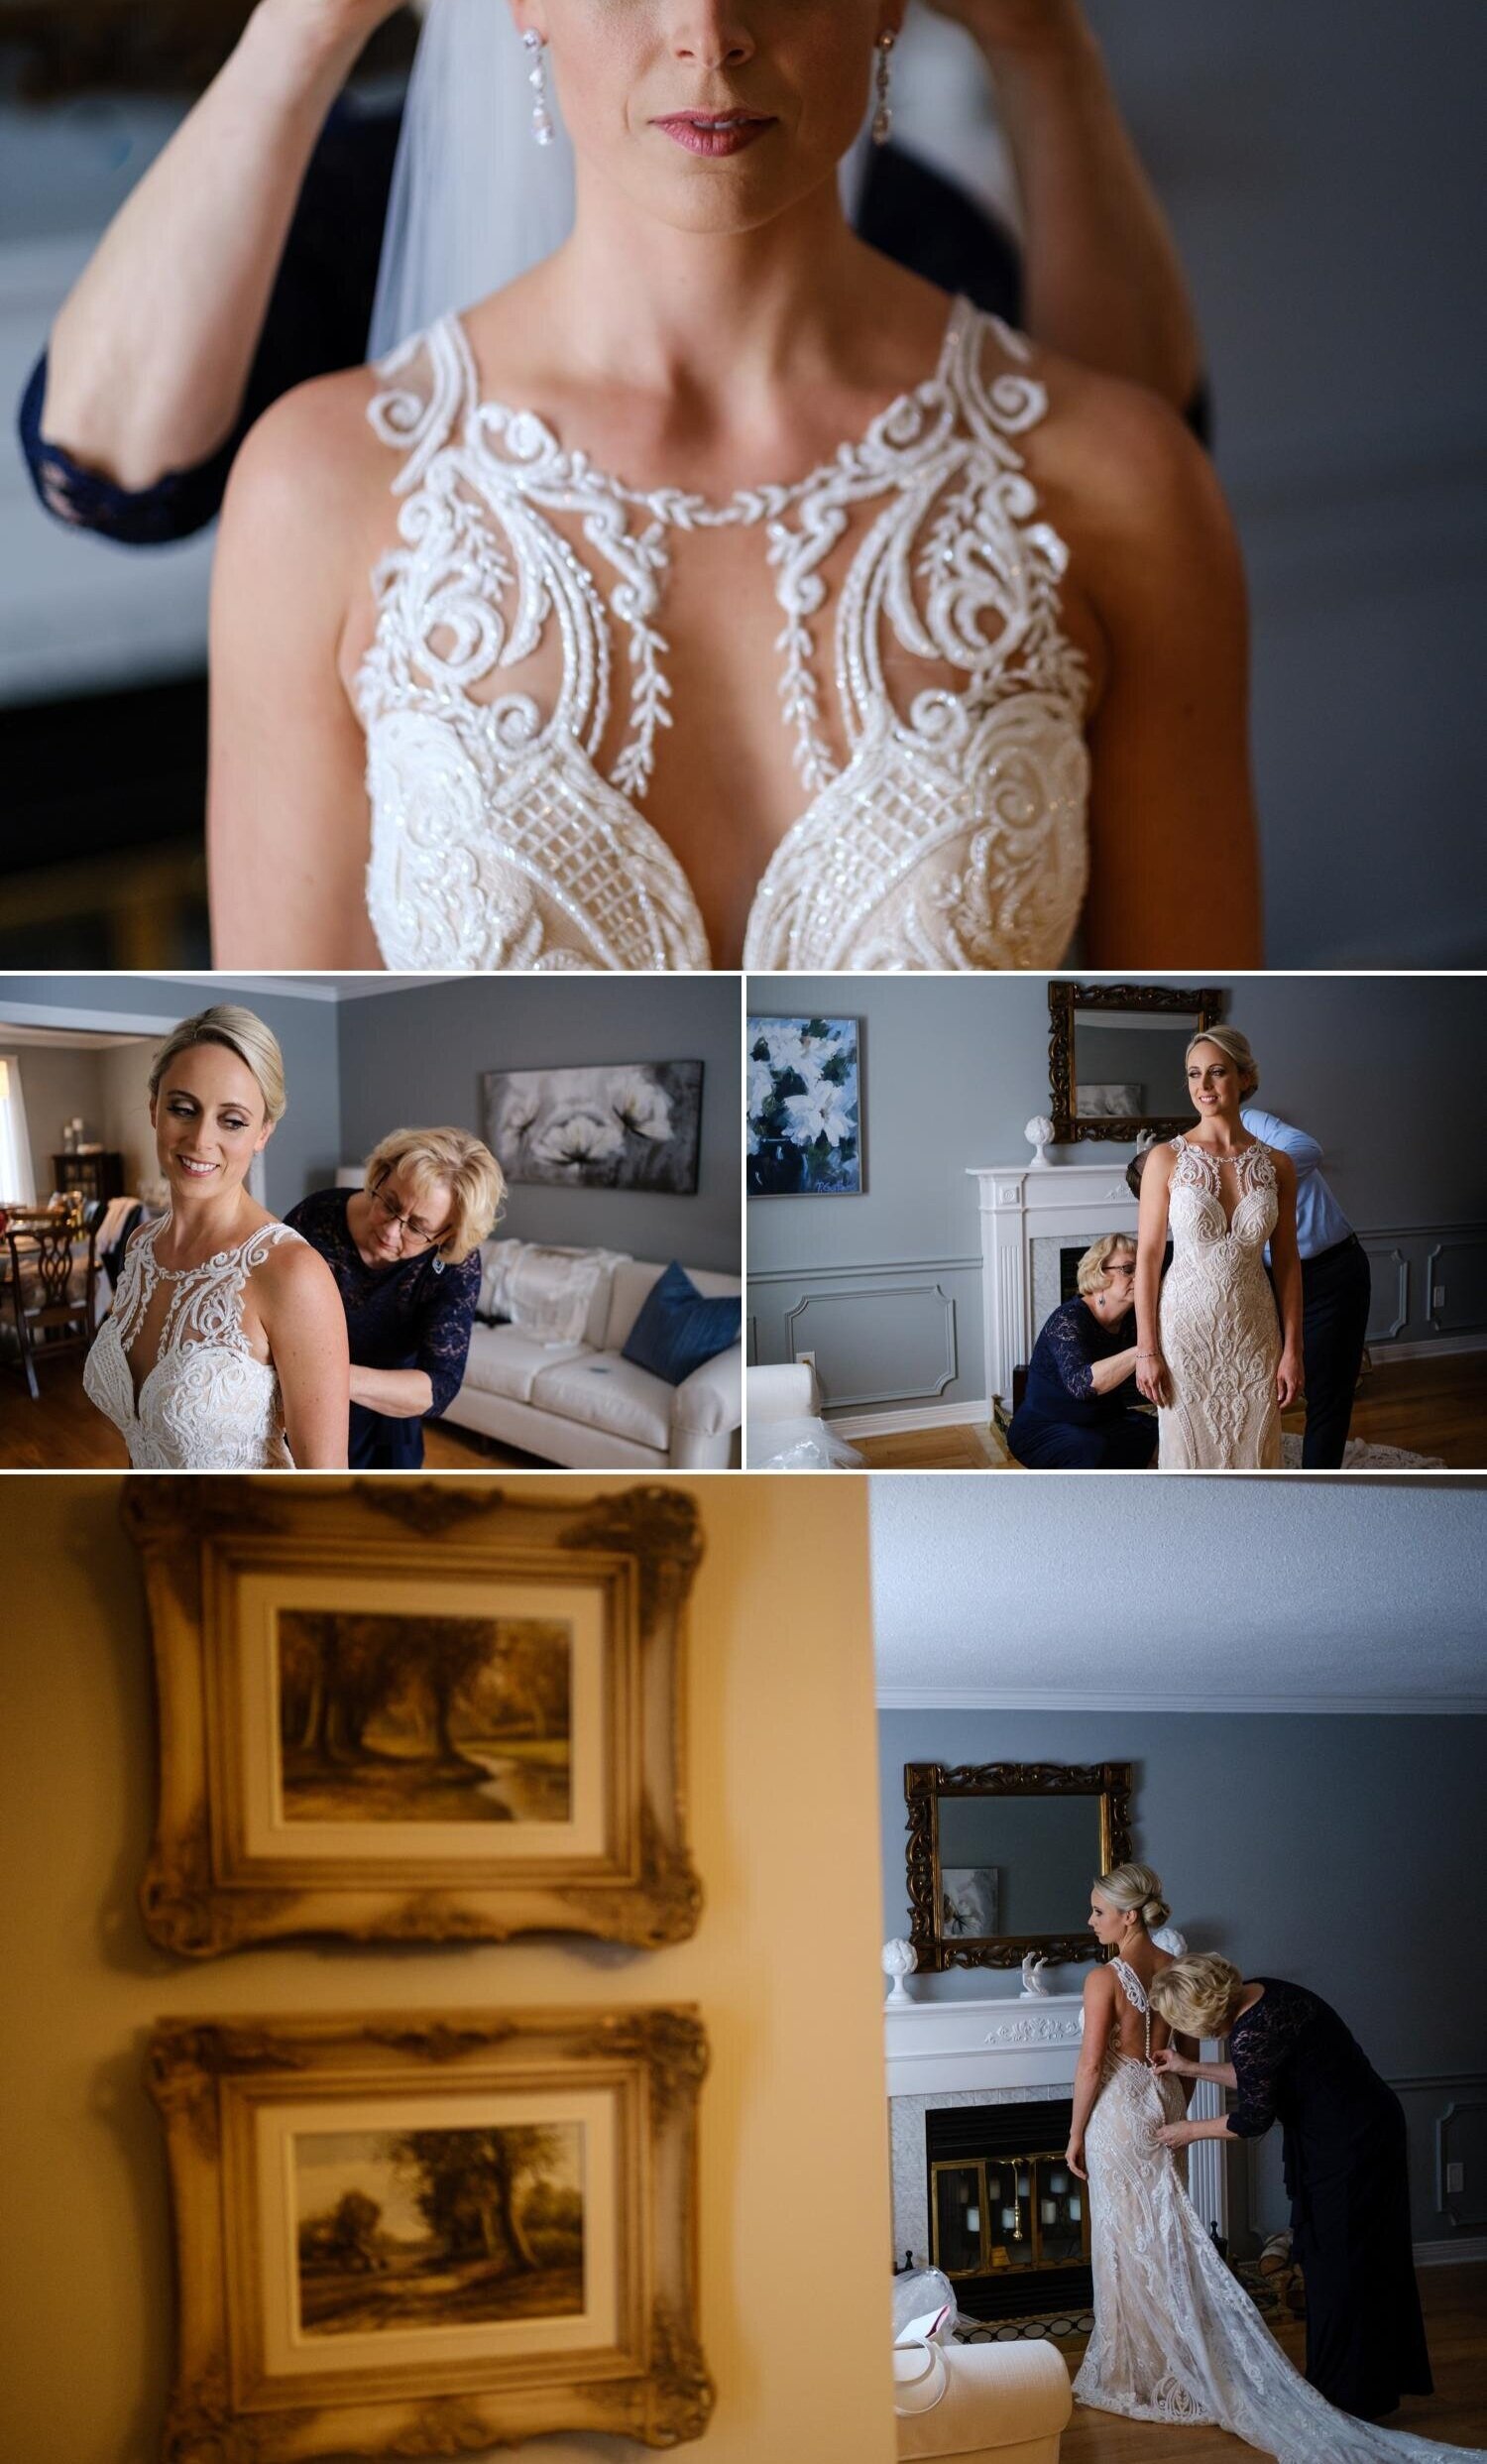 photos of a bride getting ready on her wedding day